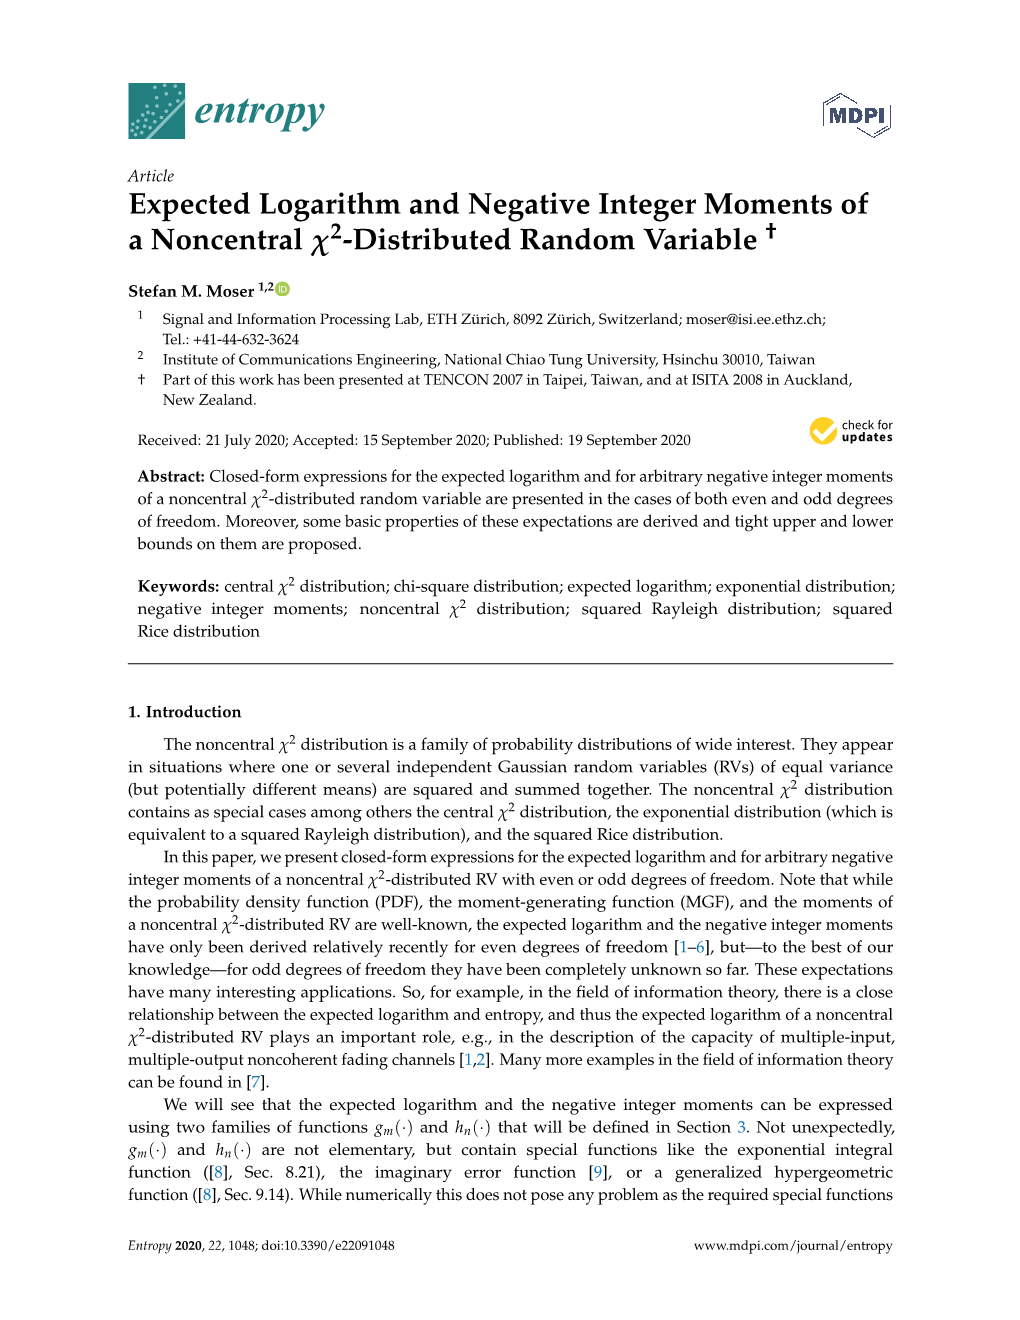 Expected Logarithm and Negative Integer Moments of a Noncentral 2-Distributed Random Variable